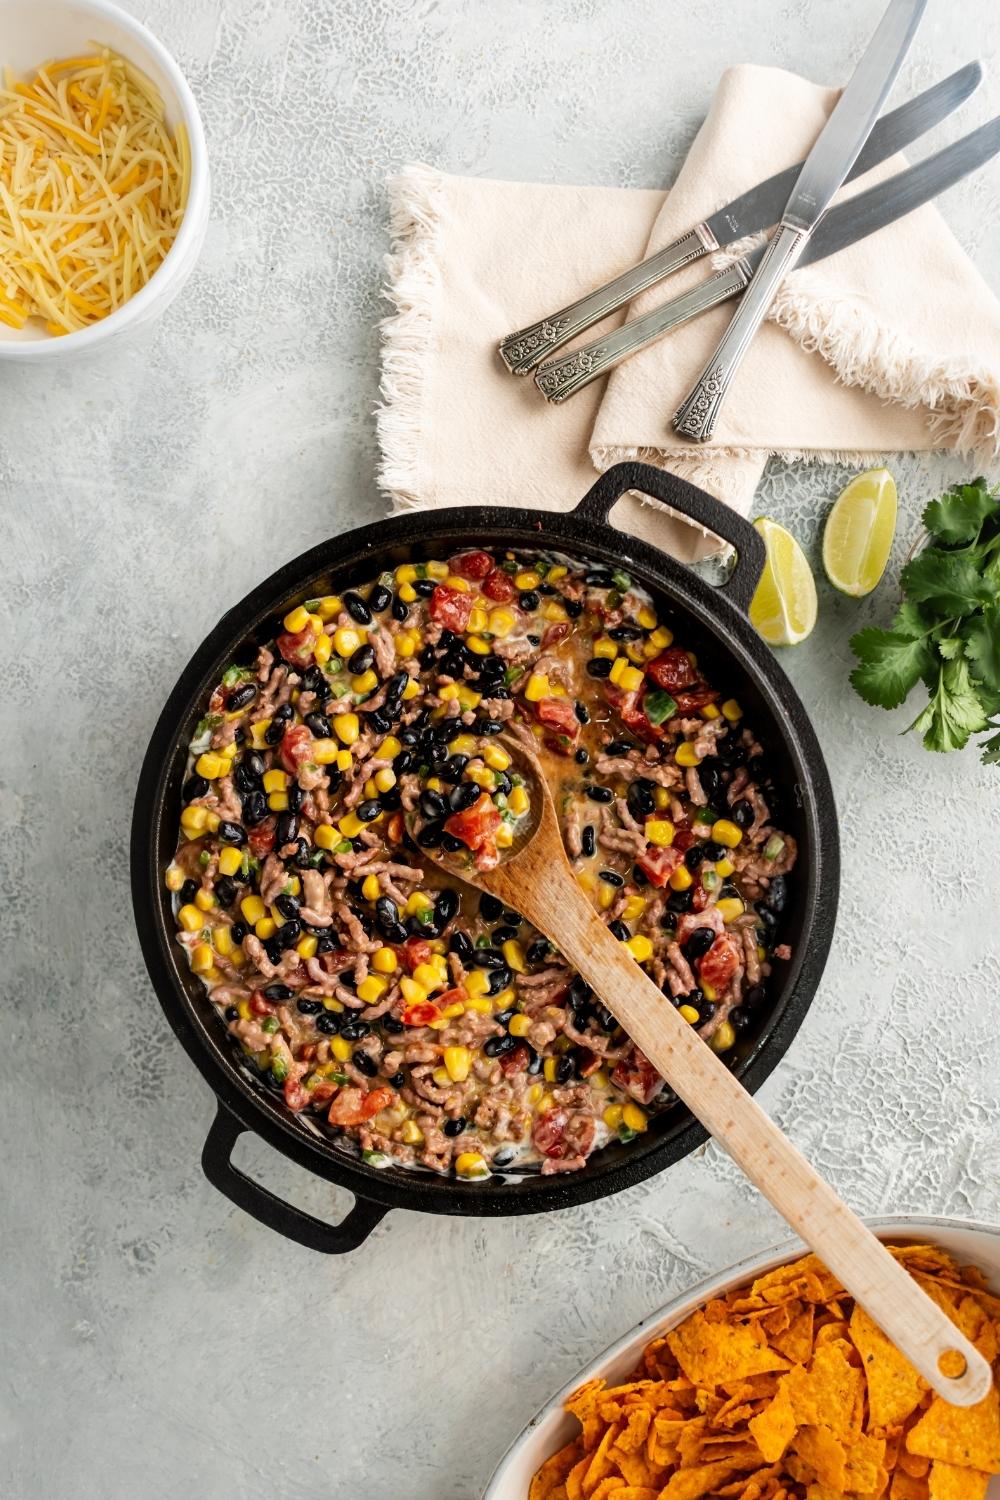 Black beans, corn, tomatoes, green chilies, and ground beef all in a black skillet. In front of it is part of a white cup of shredded cheese and behind it is part of a white dish with nacho cheese flavored Doritos.